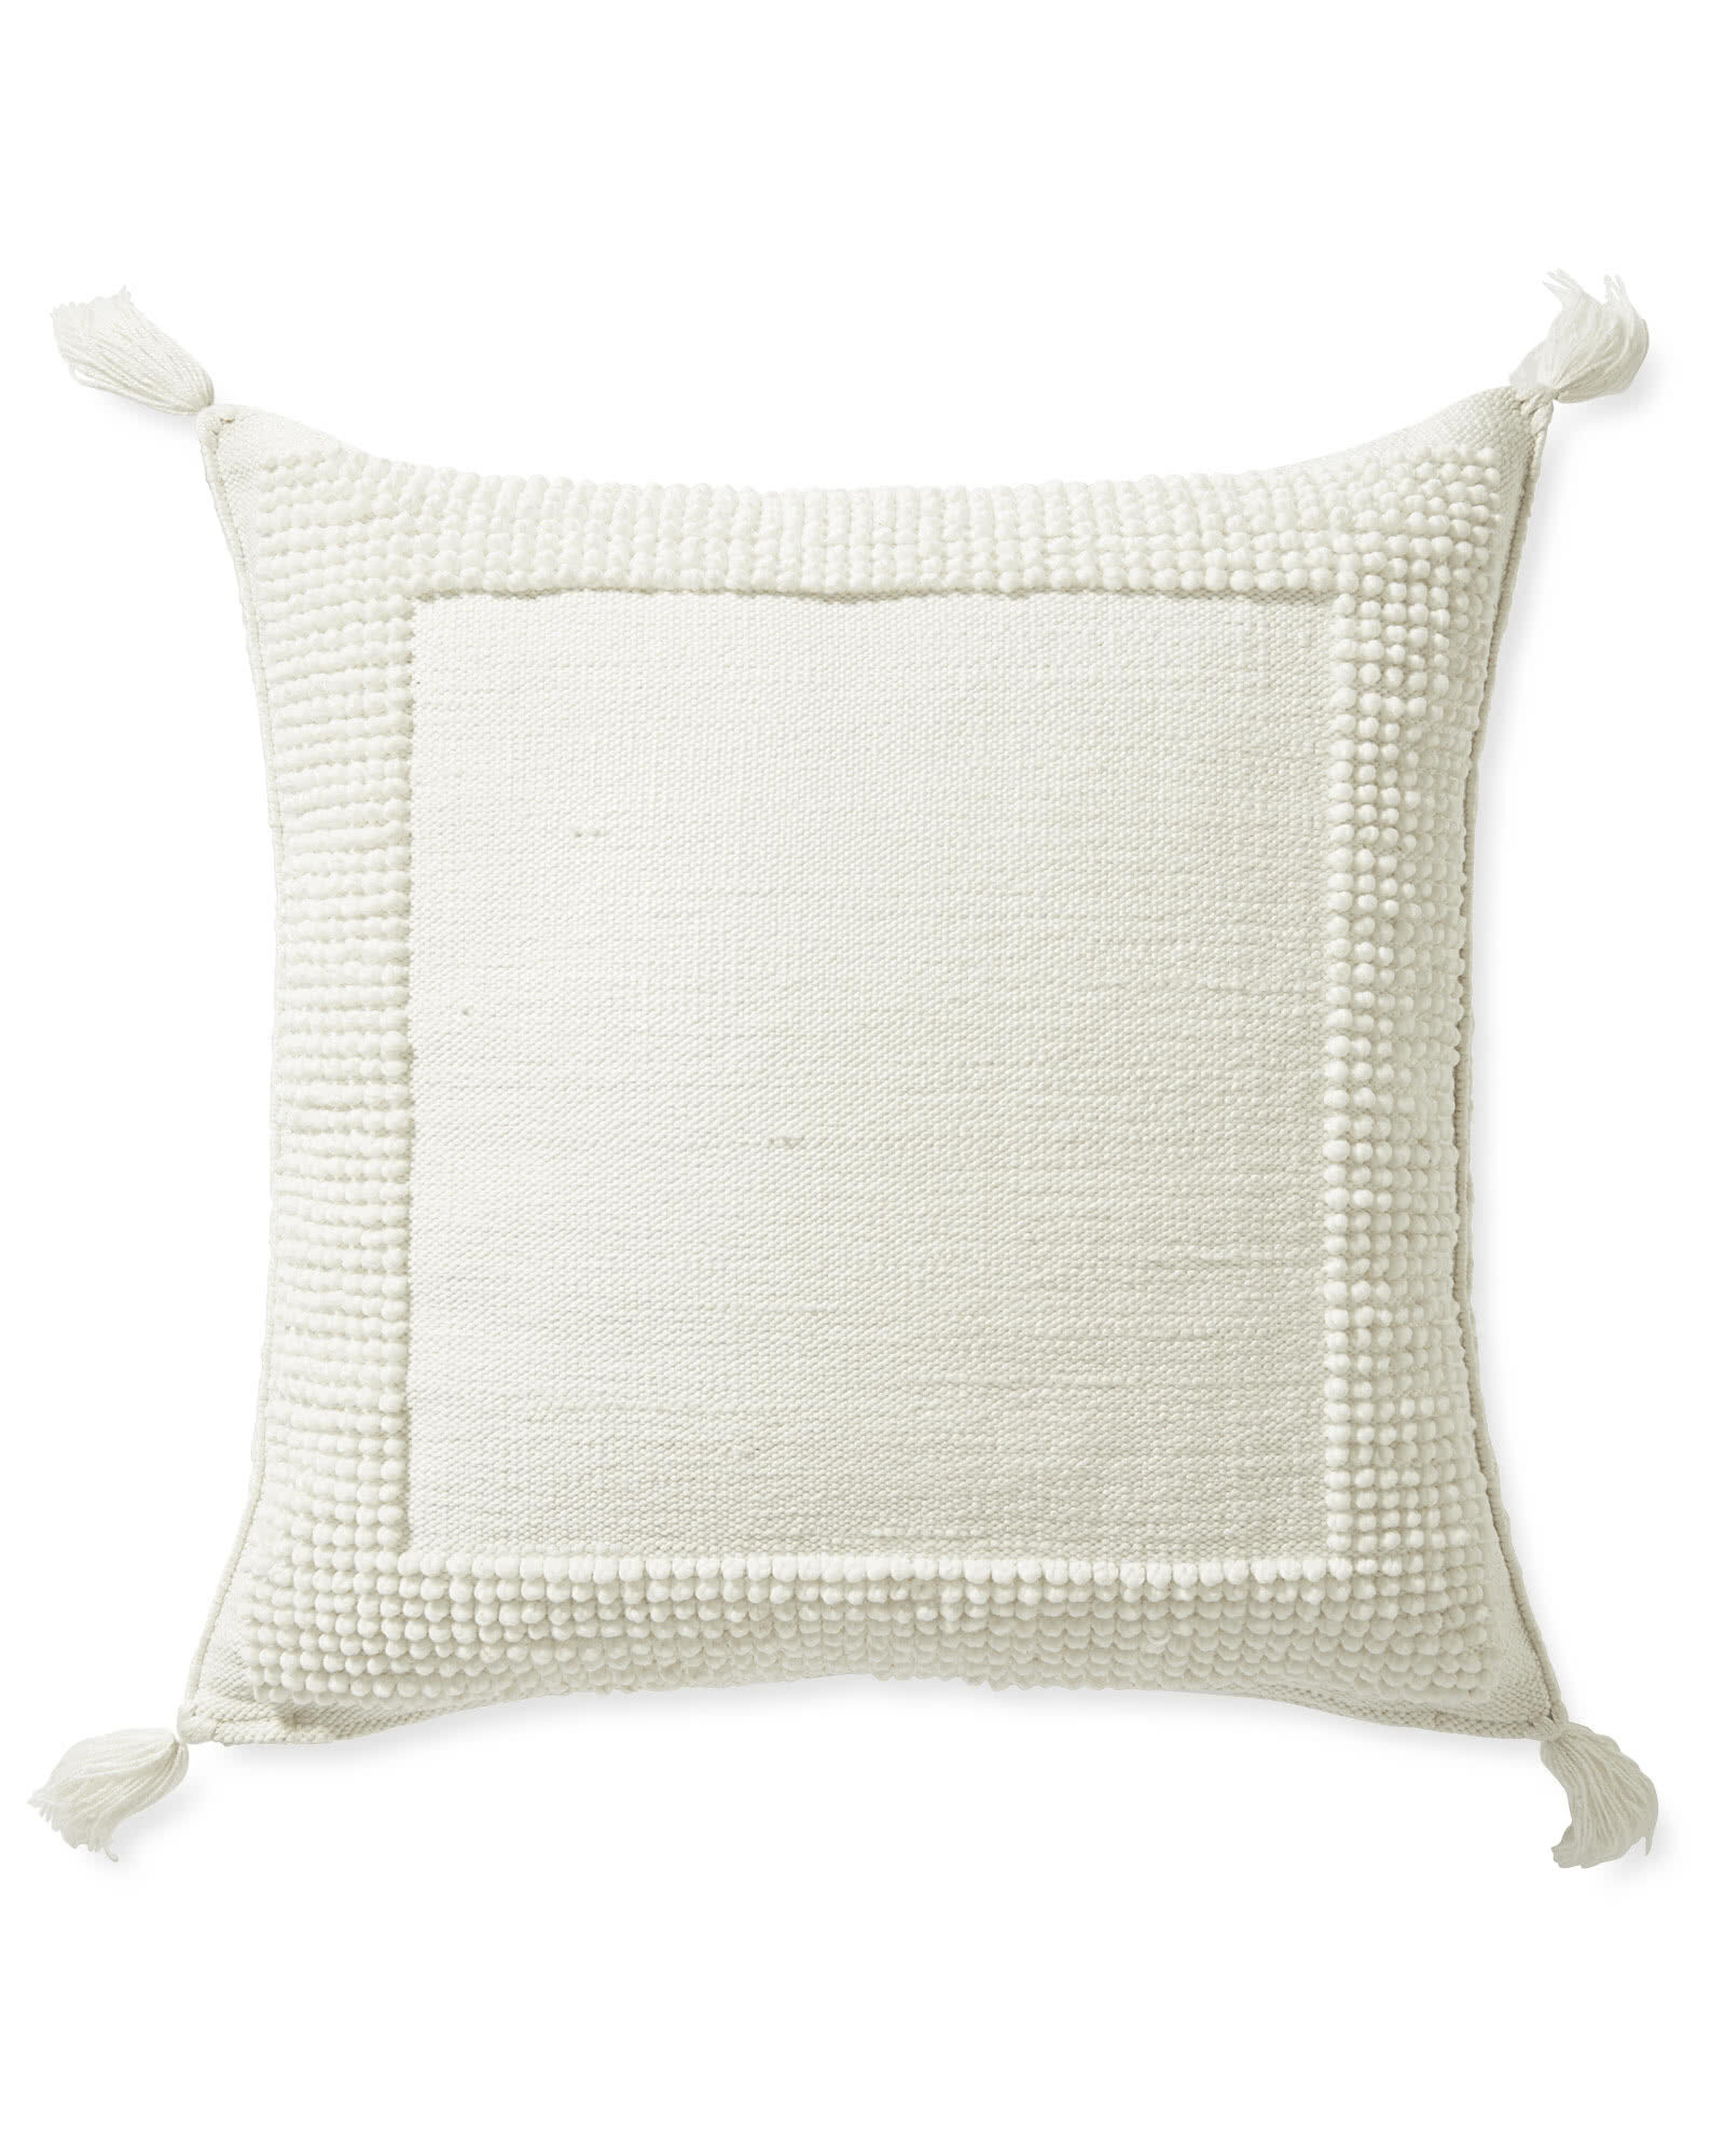 Montecito Floor Pillow - Serena and Lily